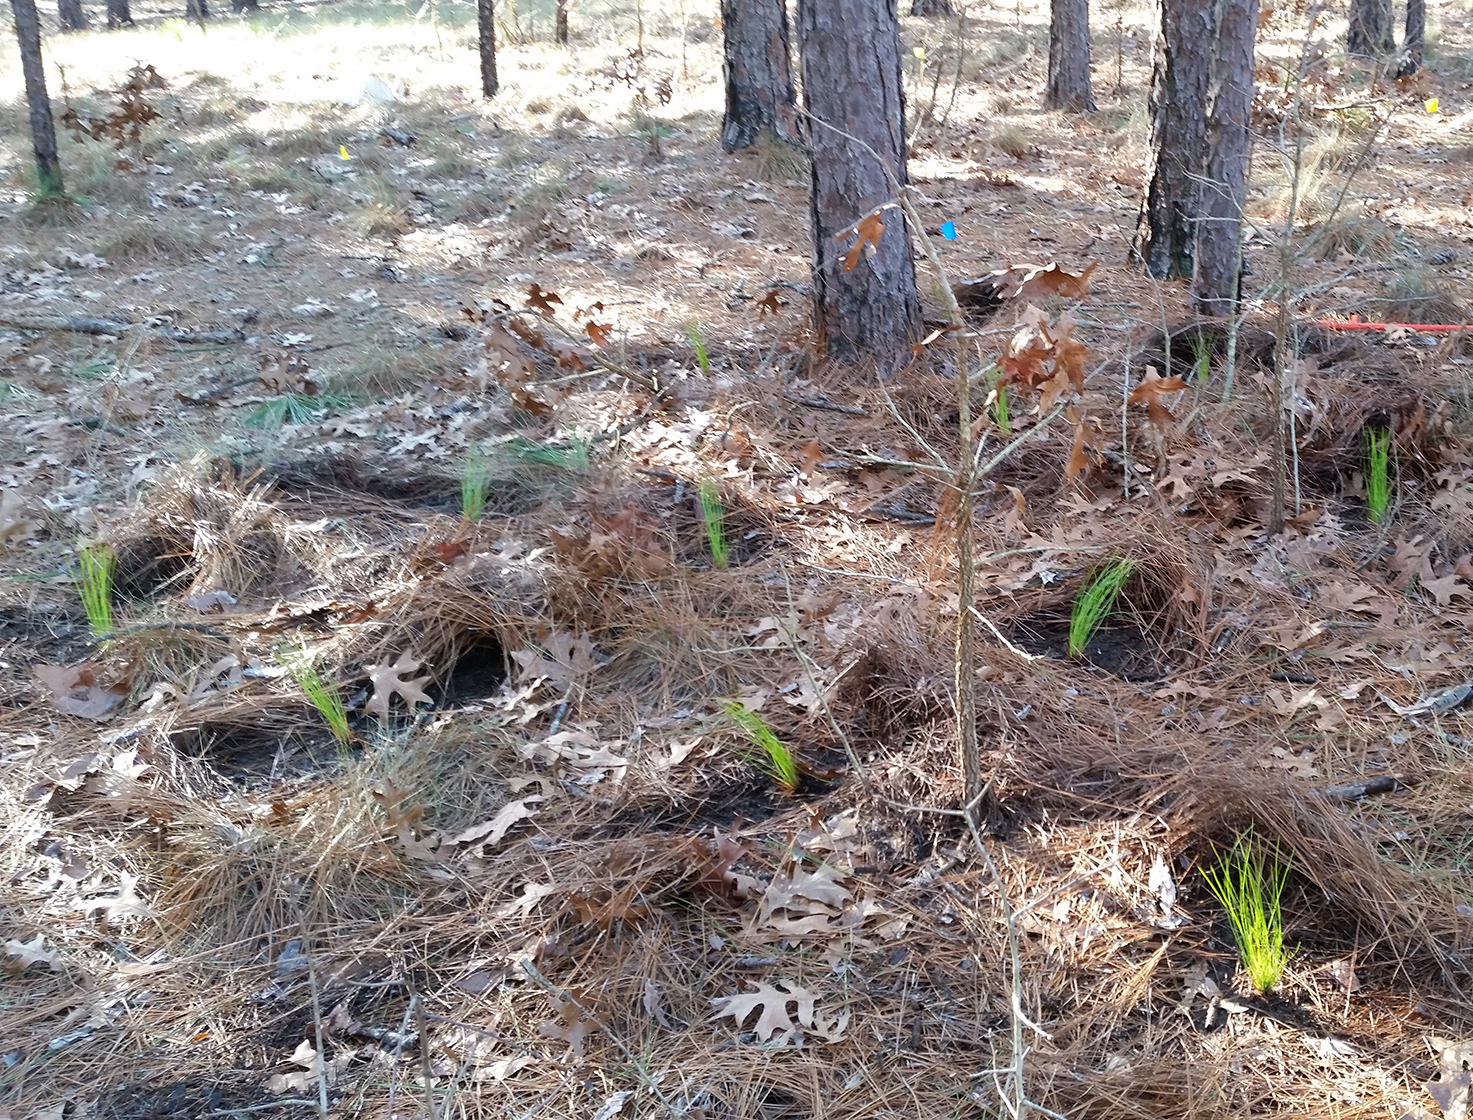 Brown, stringy pine seedlings lay in a pile on the forest floor at the trunks of trees.